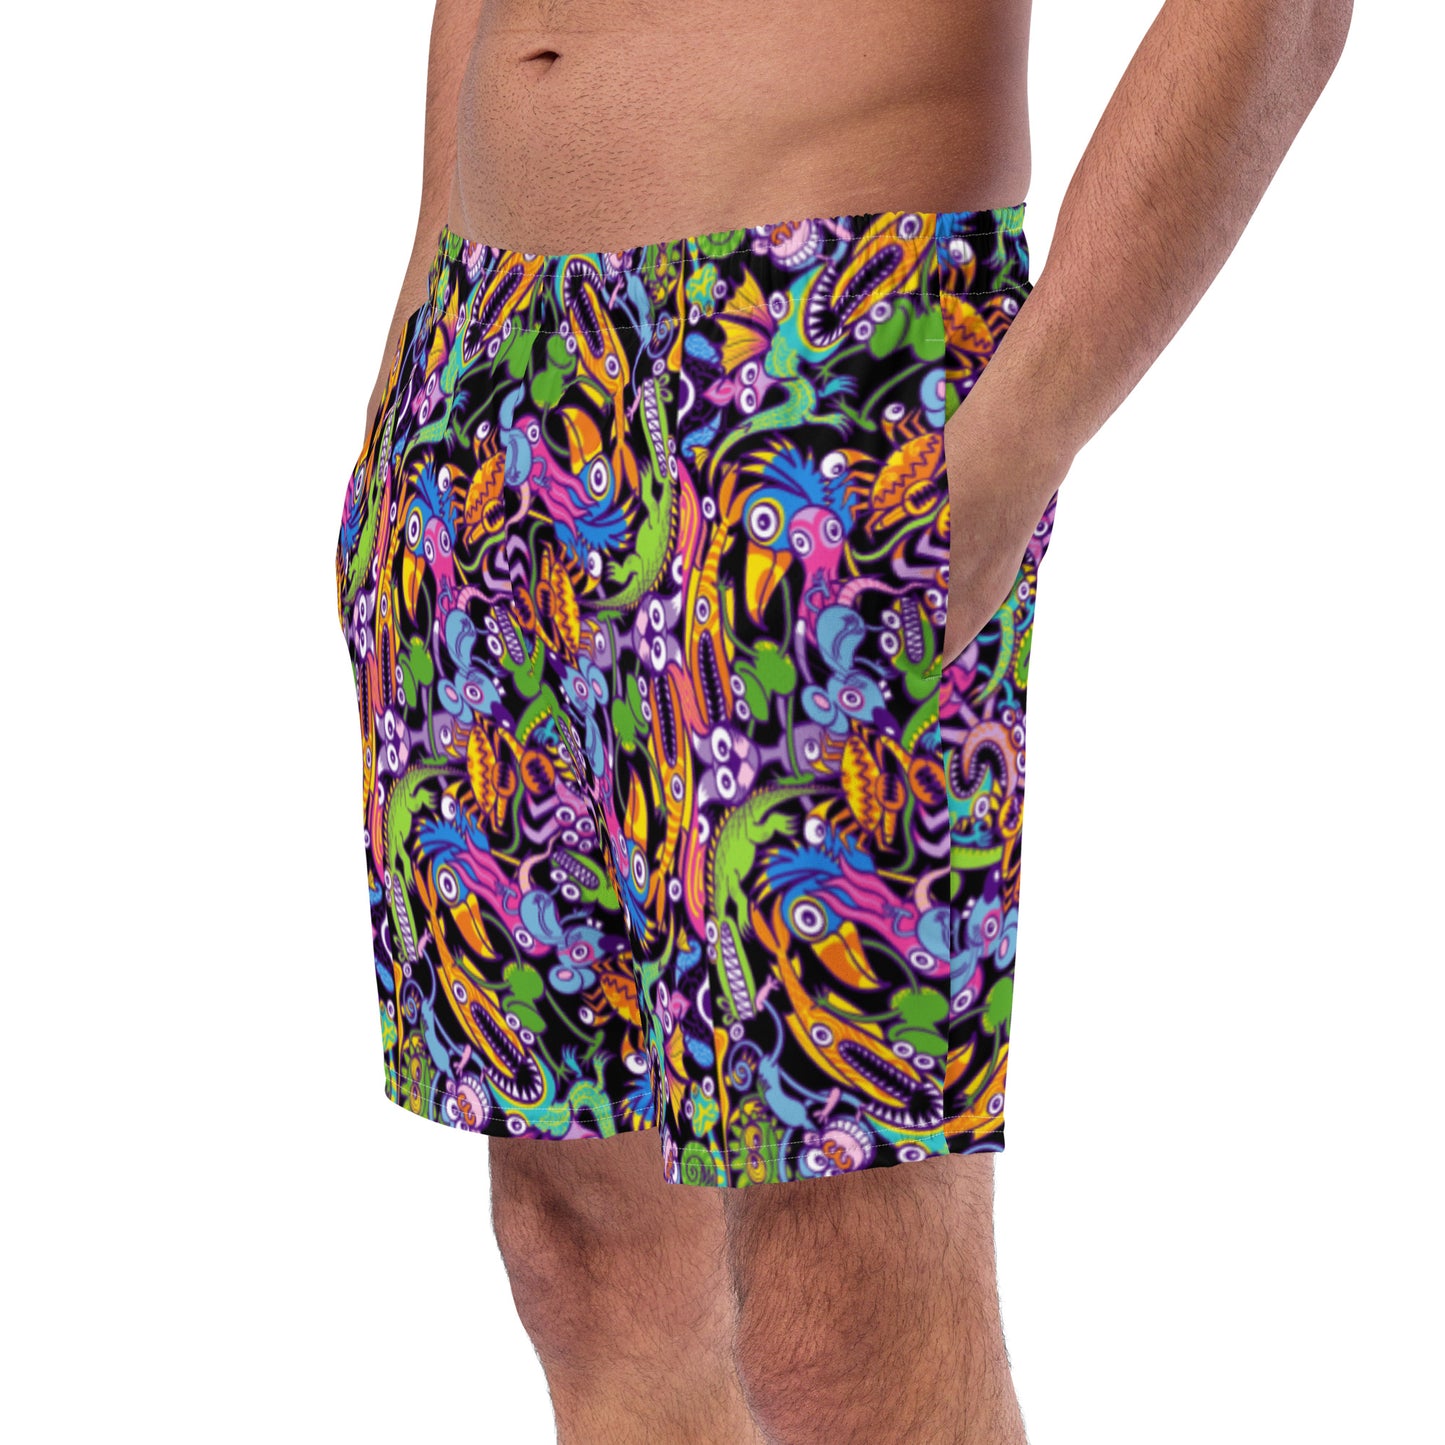 Eccentric critters in a lively crazy festival Men's swim trunks. Side view